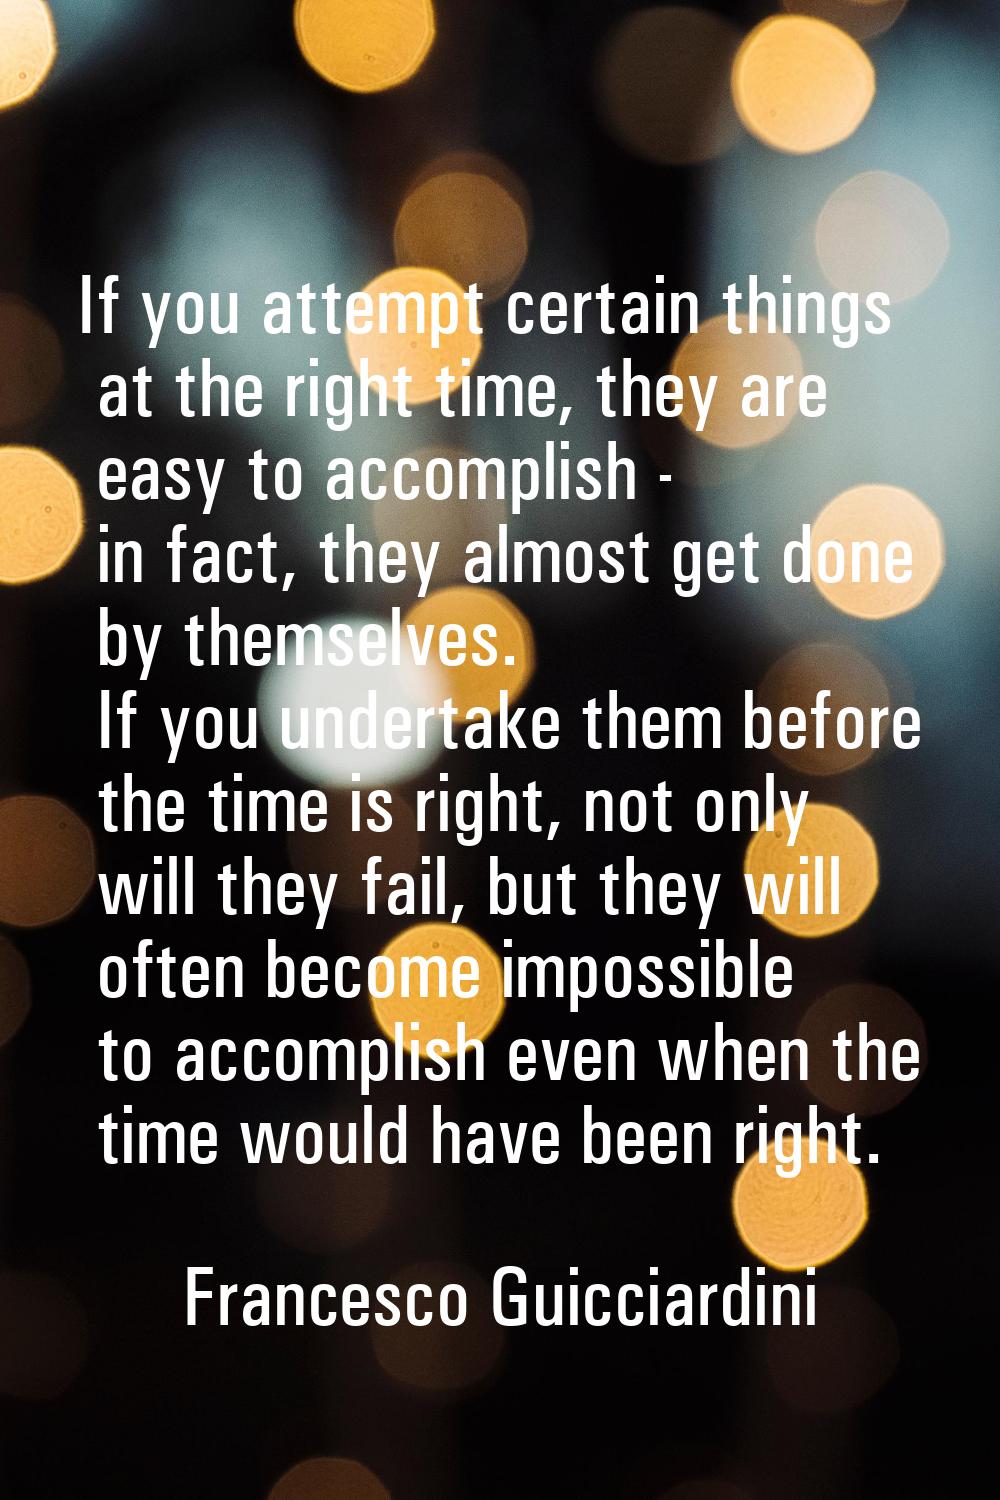 If you attempt certain things at the right time, they are easy to accomplish - in fact, they almost